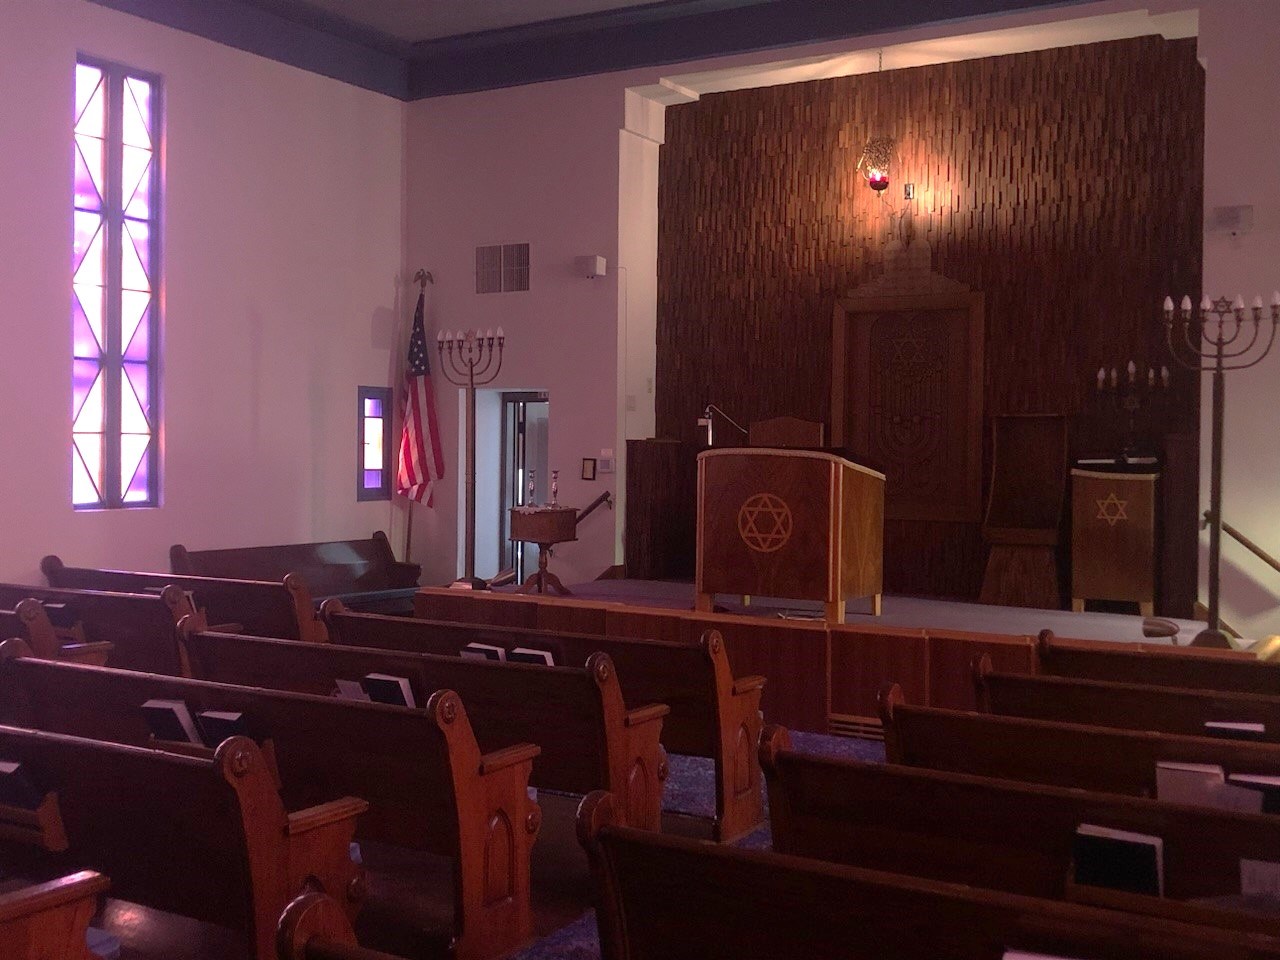 Interior of a synagogue illuminated by a stained glass window. The bimah includes a centered reading table, a suspended lamp, and a textured wall.